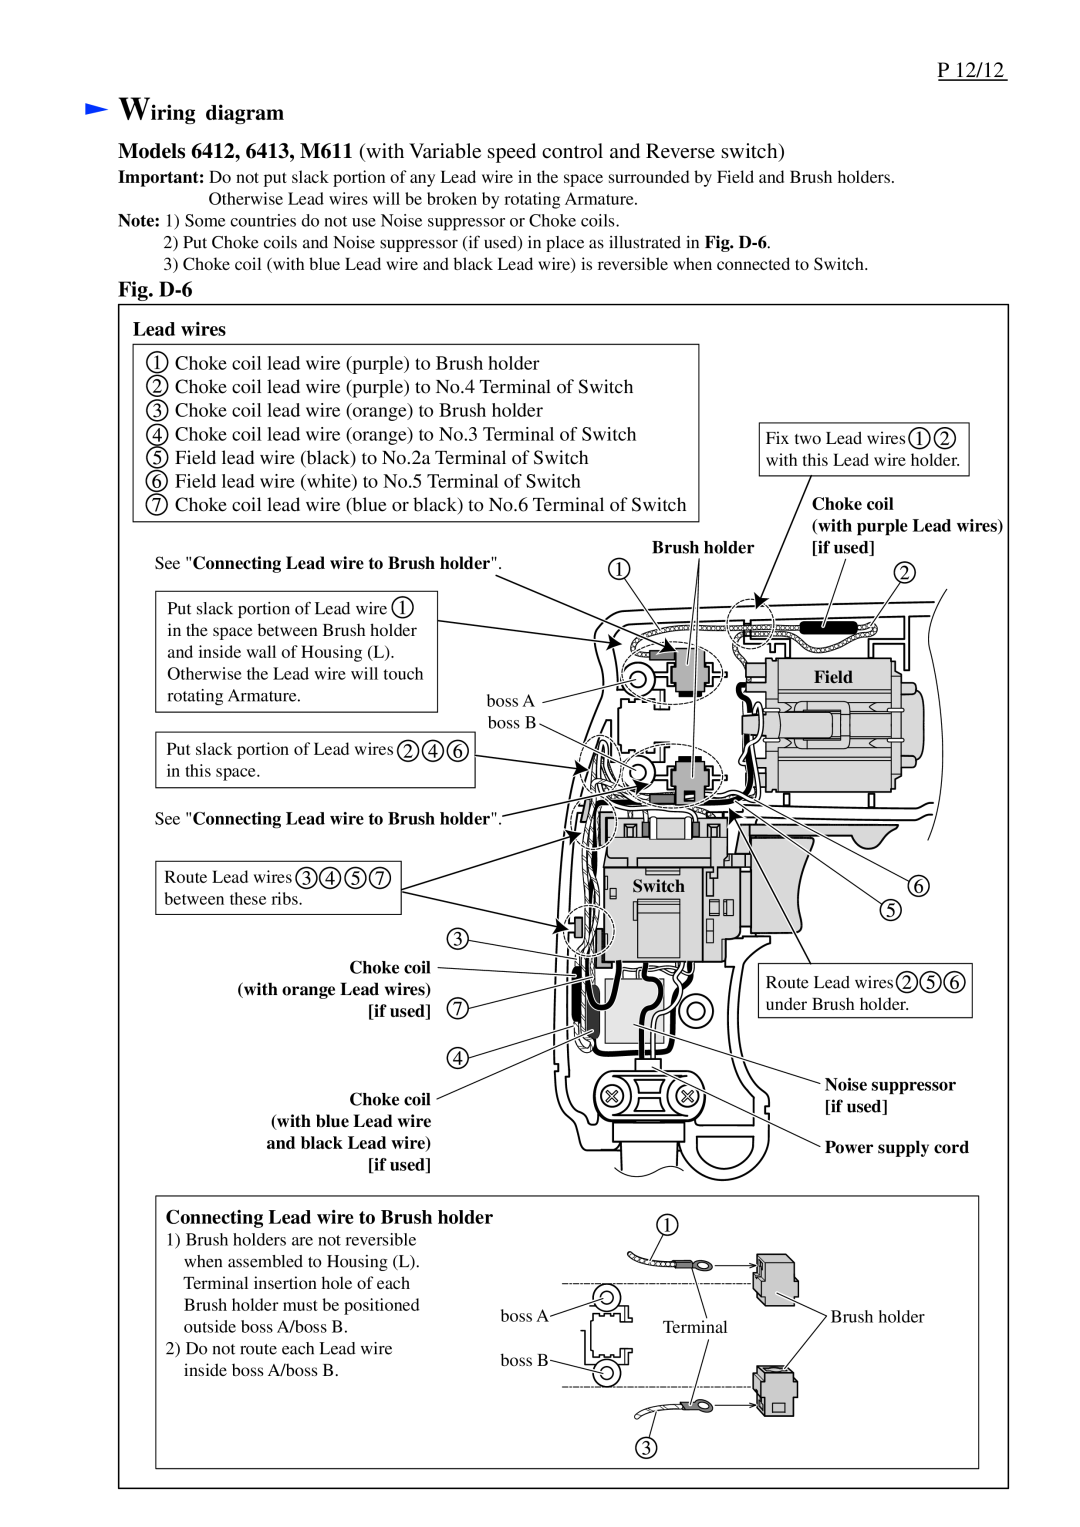 Makita M611 P 12/12, Fig. D-6, Choke coil lead wire purple to No.4 Terminal of Switch, Wiring diagram, Lead wires, Field 